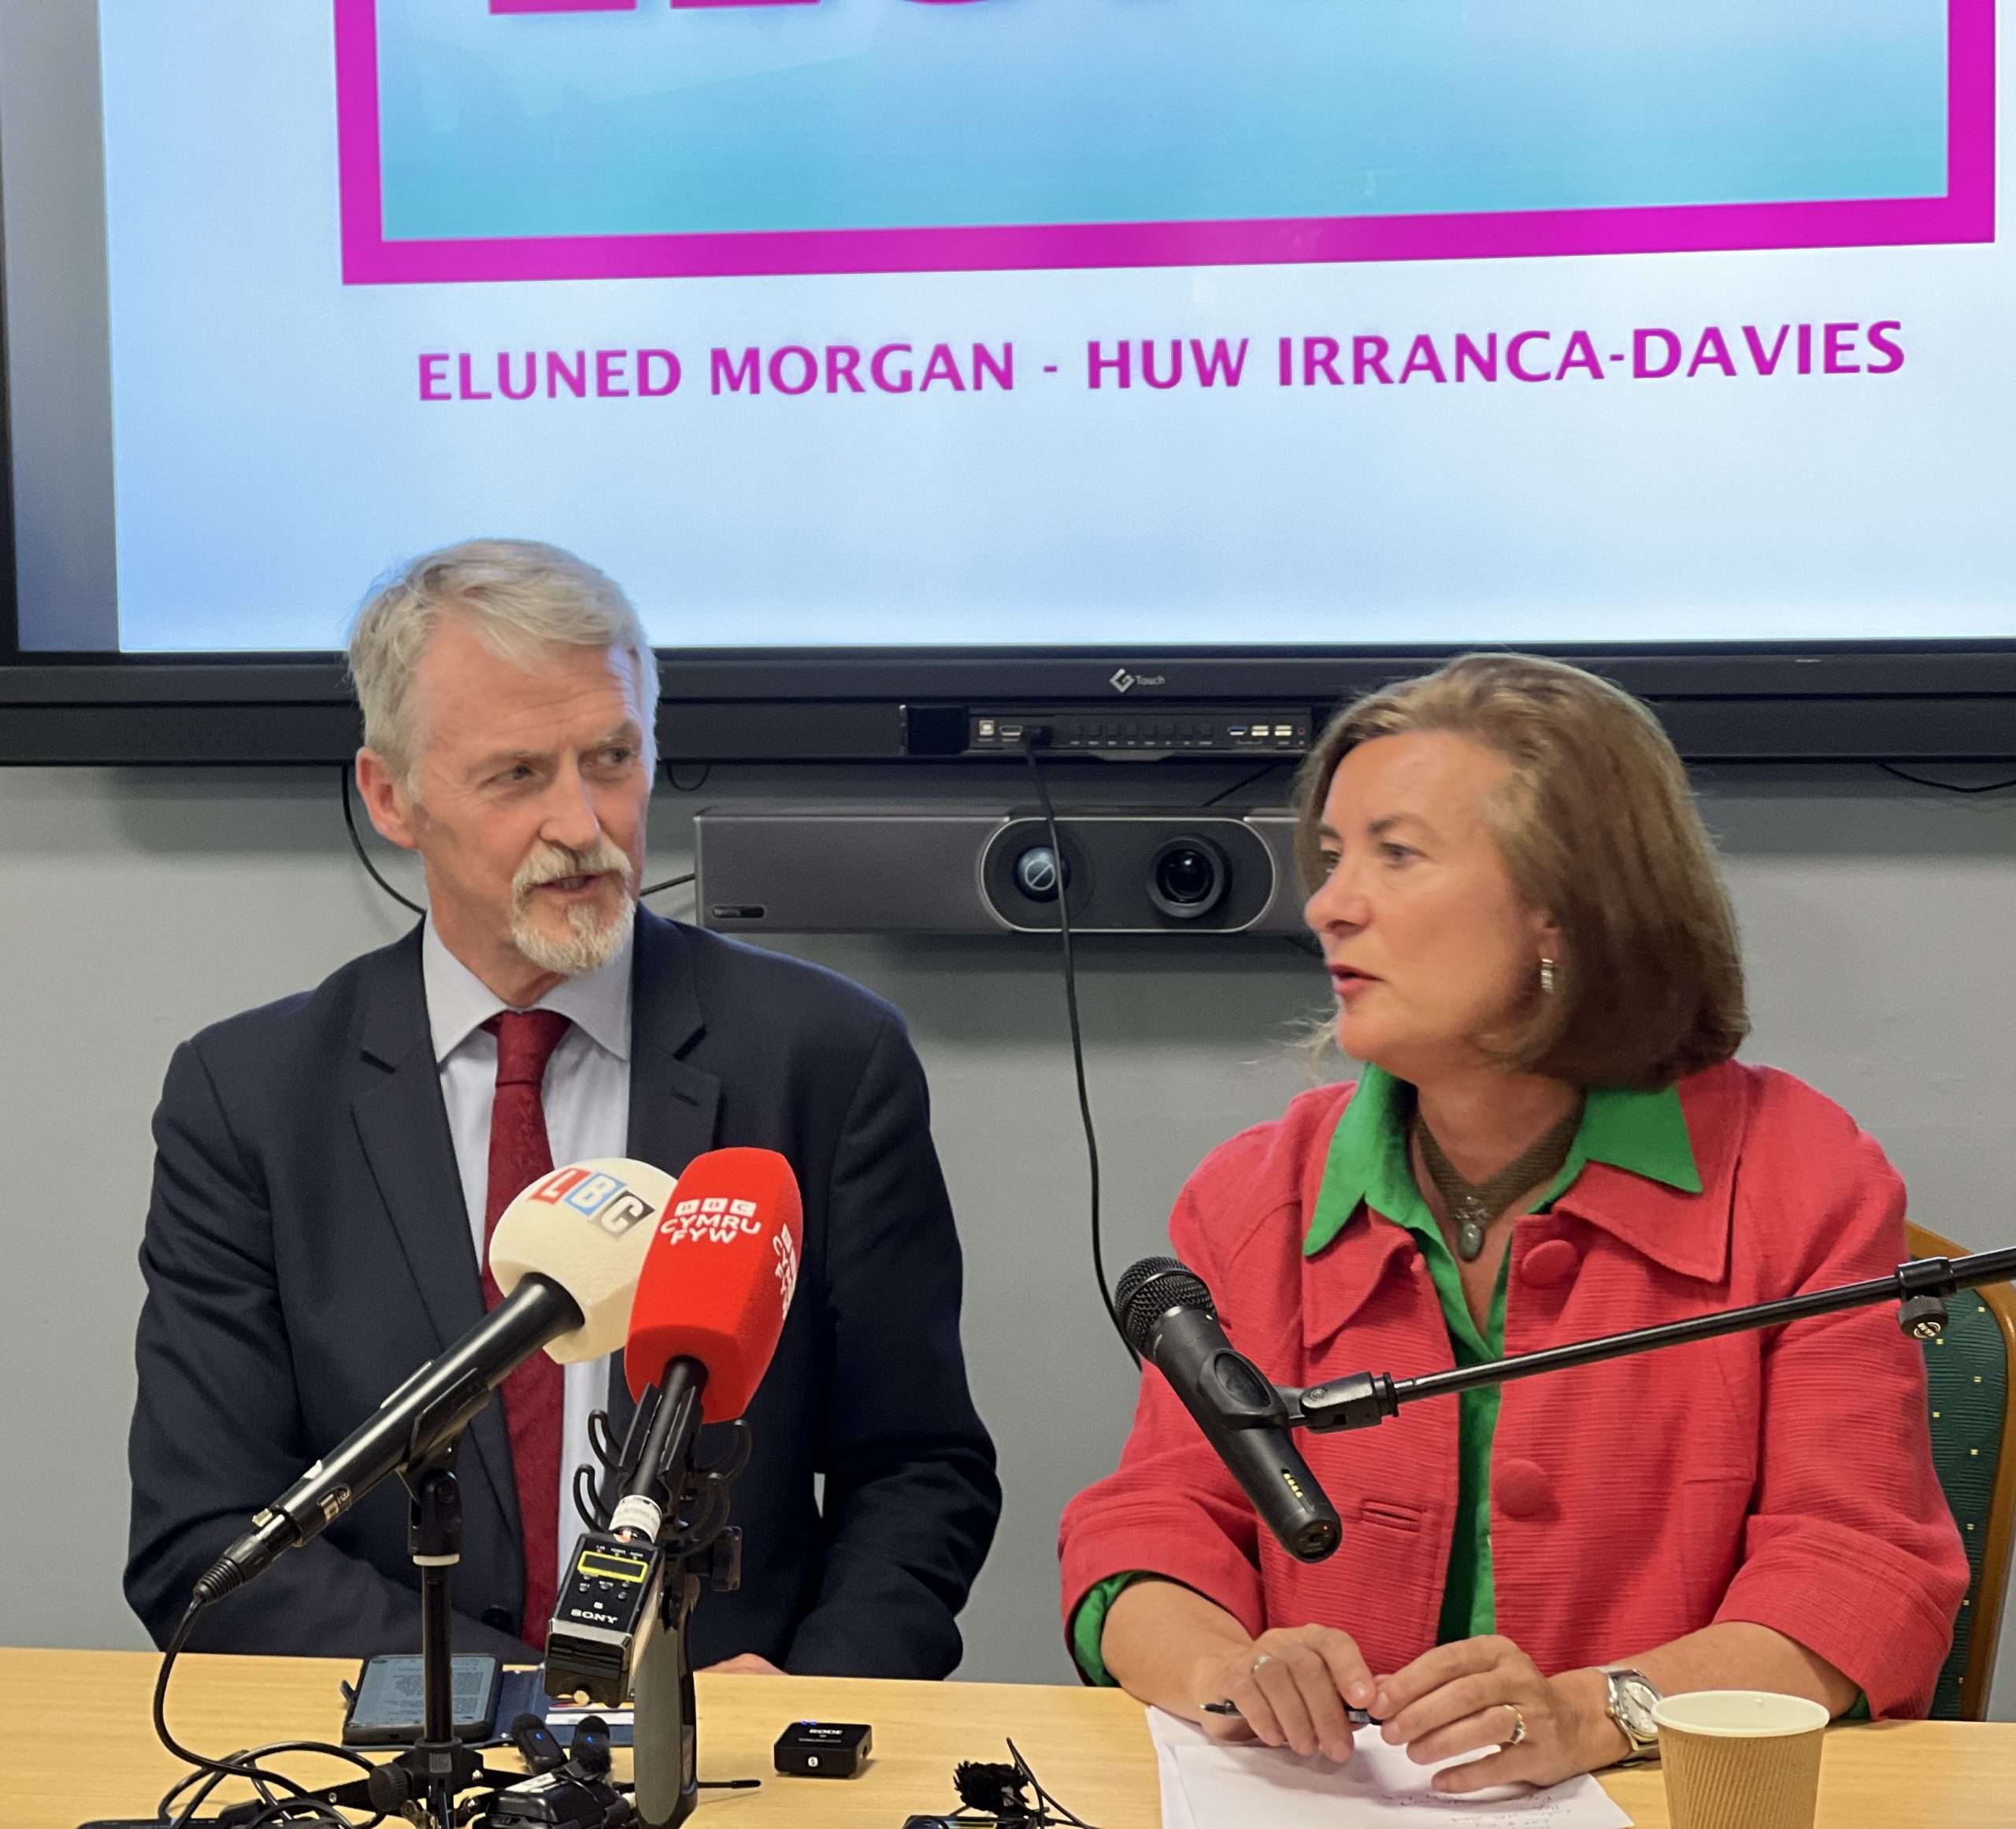 Eluned Morgan announces joint ticket for First Minister with Huw Irranca-Davies